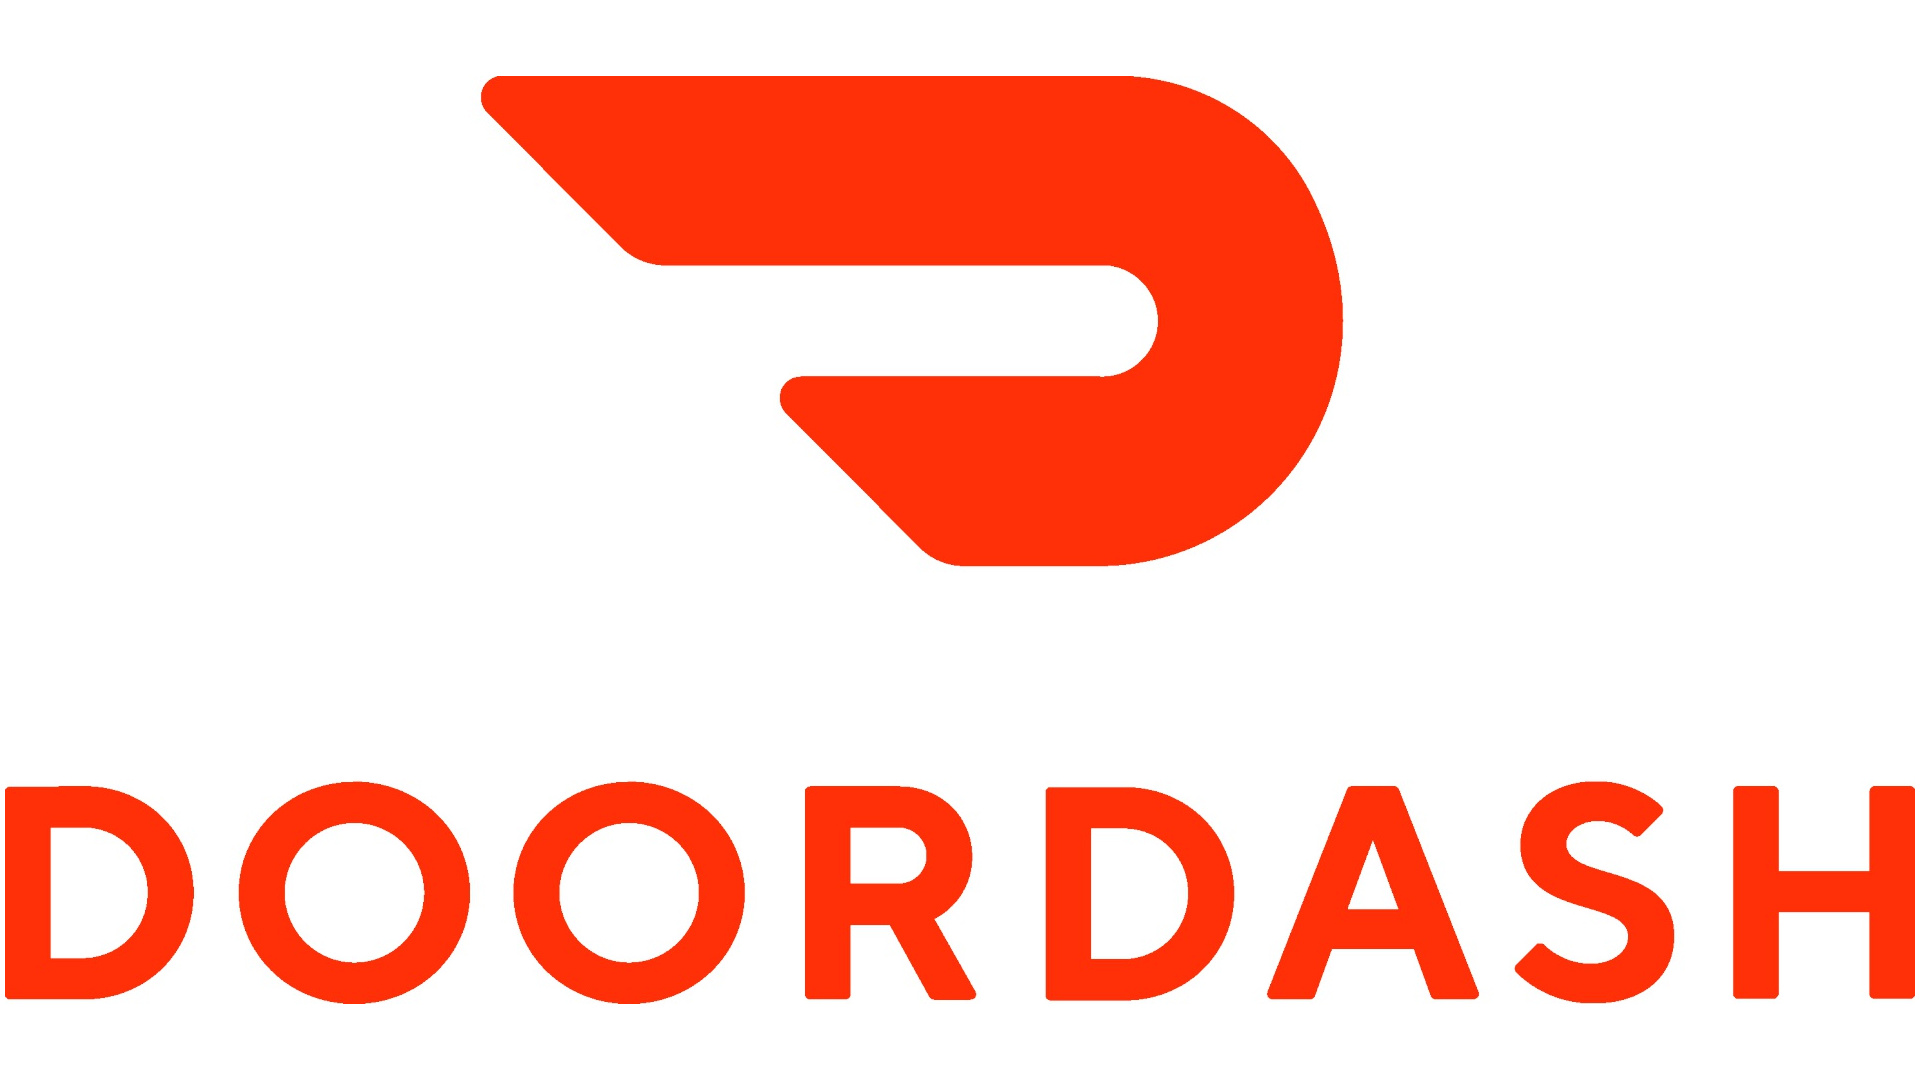 DoorDash confirms security breach that affected 4.9 million users